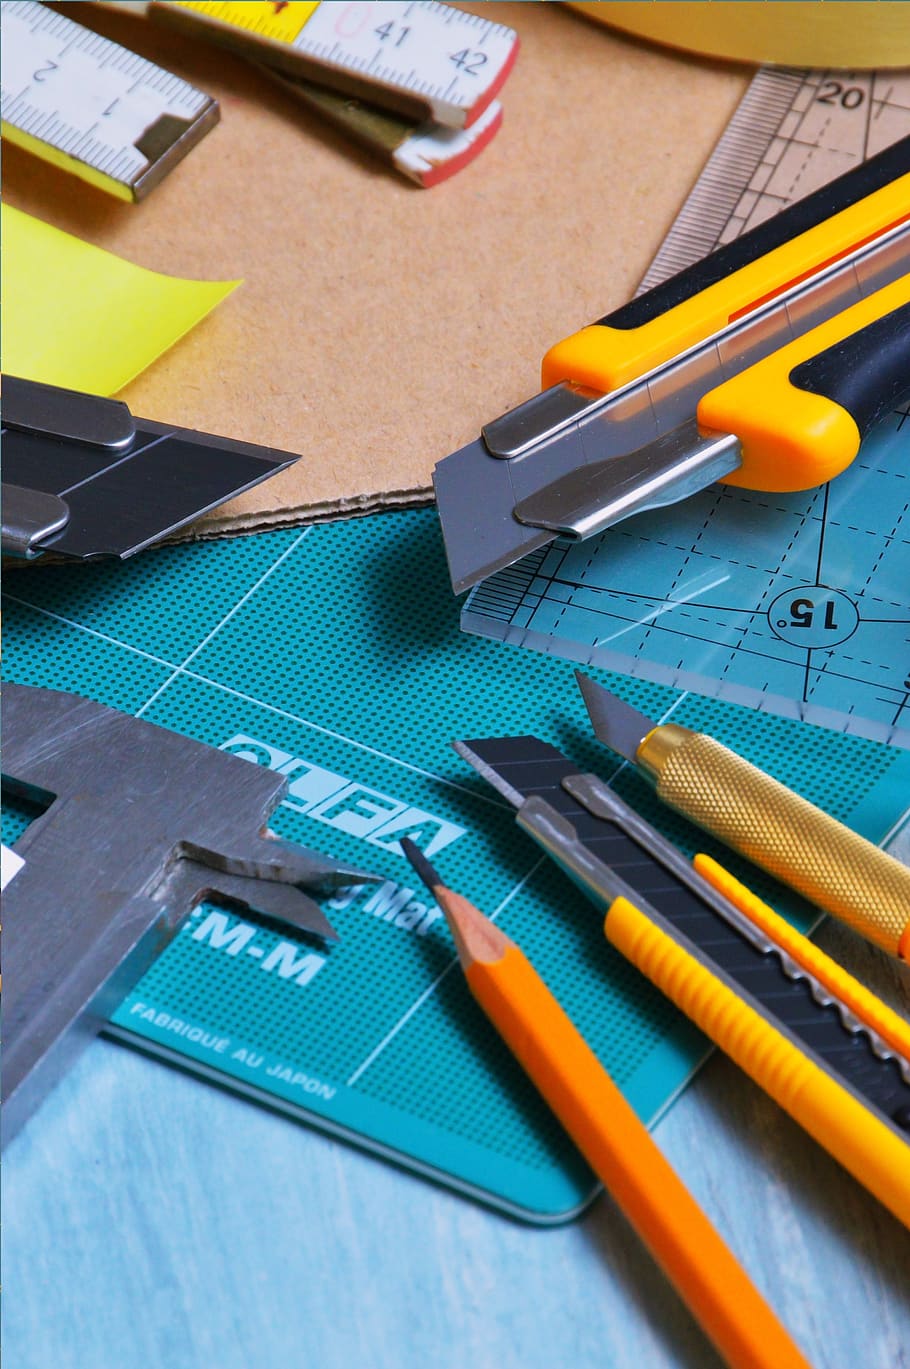 blades are engaged, hammer, subler, adhesive tape, self-adhesive, cutting mat, ruler, transparent, pencil, chores